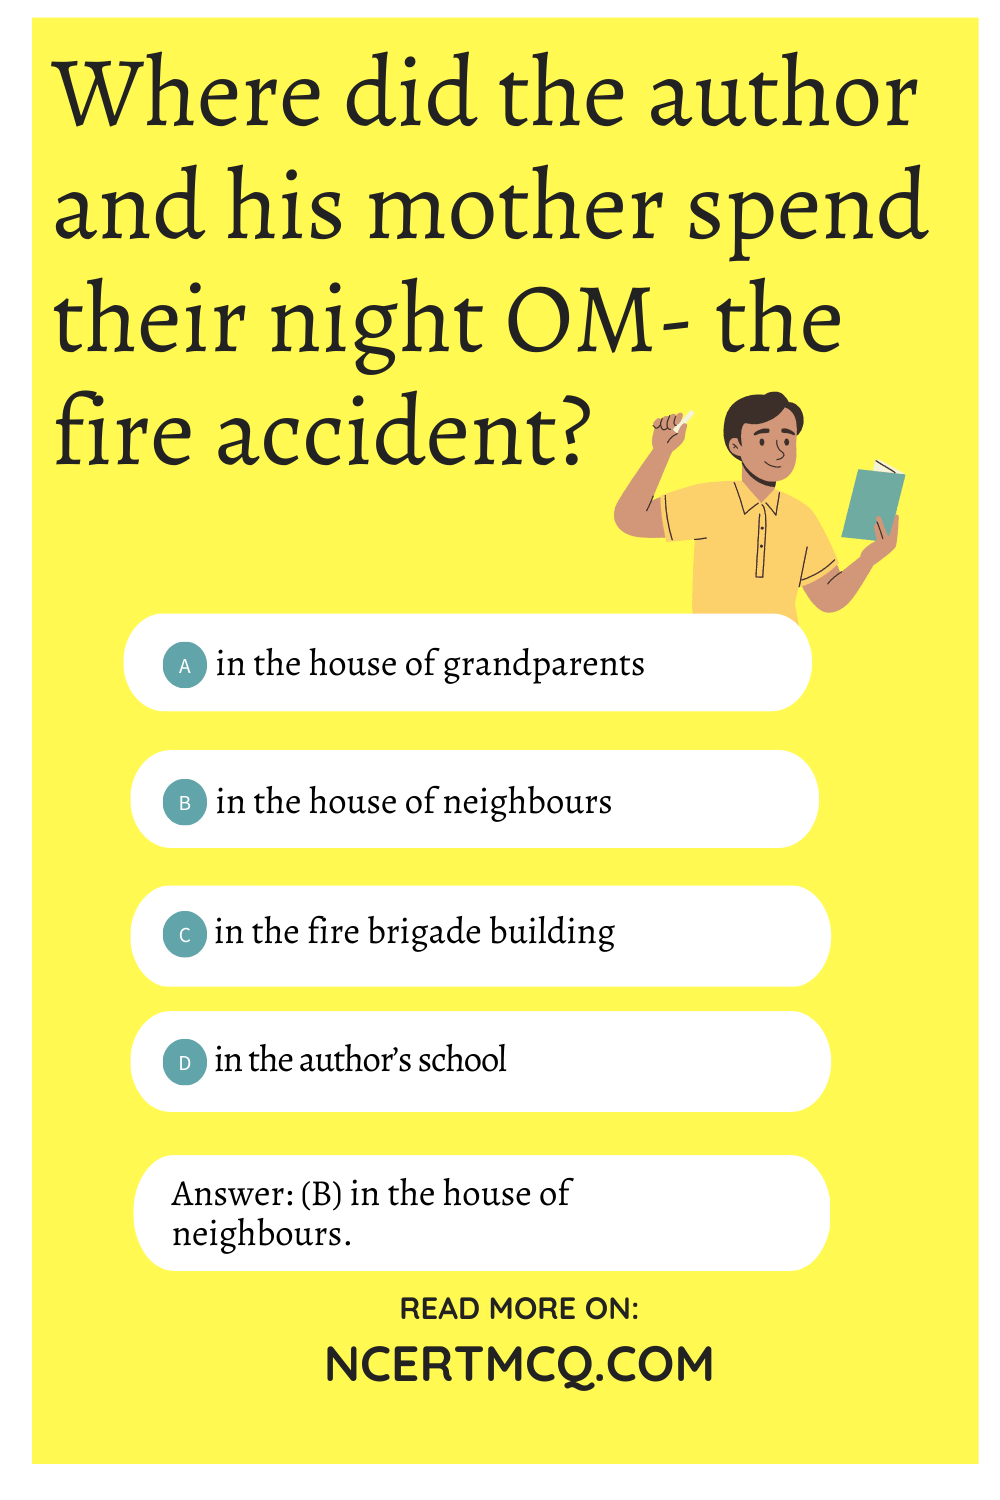 Where did the author and his mother spend their night OM- the fire accident?